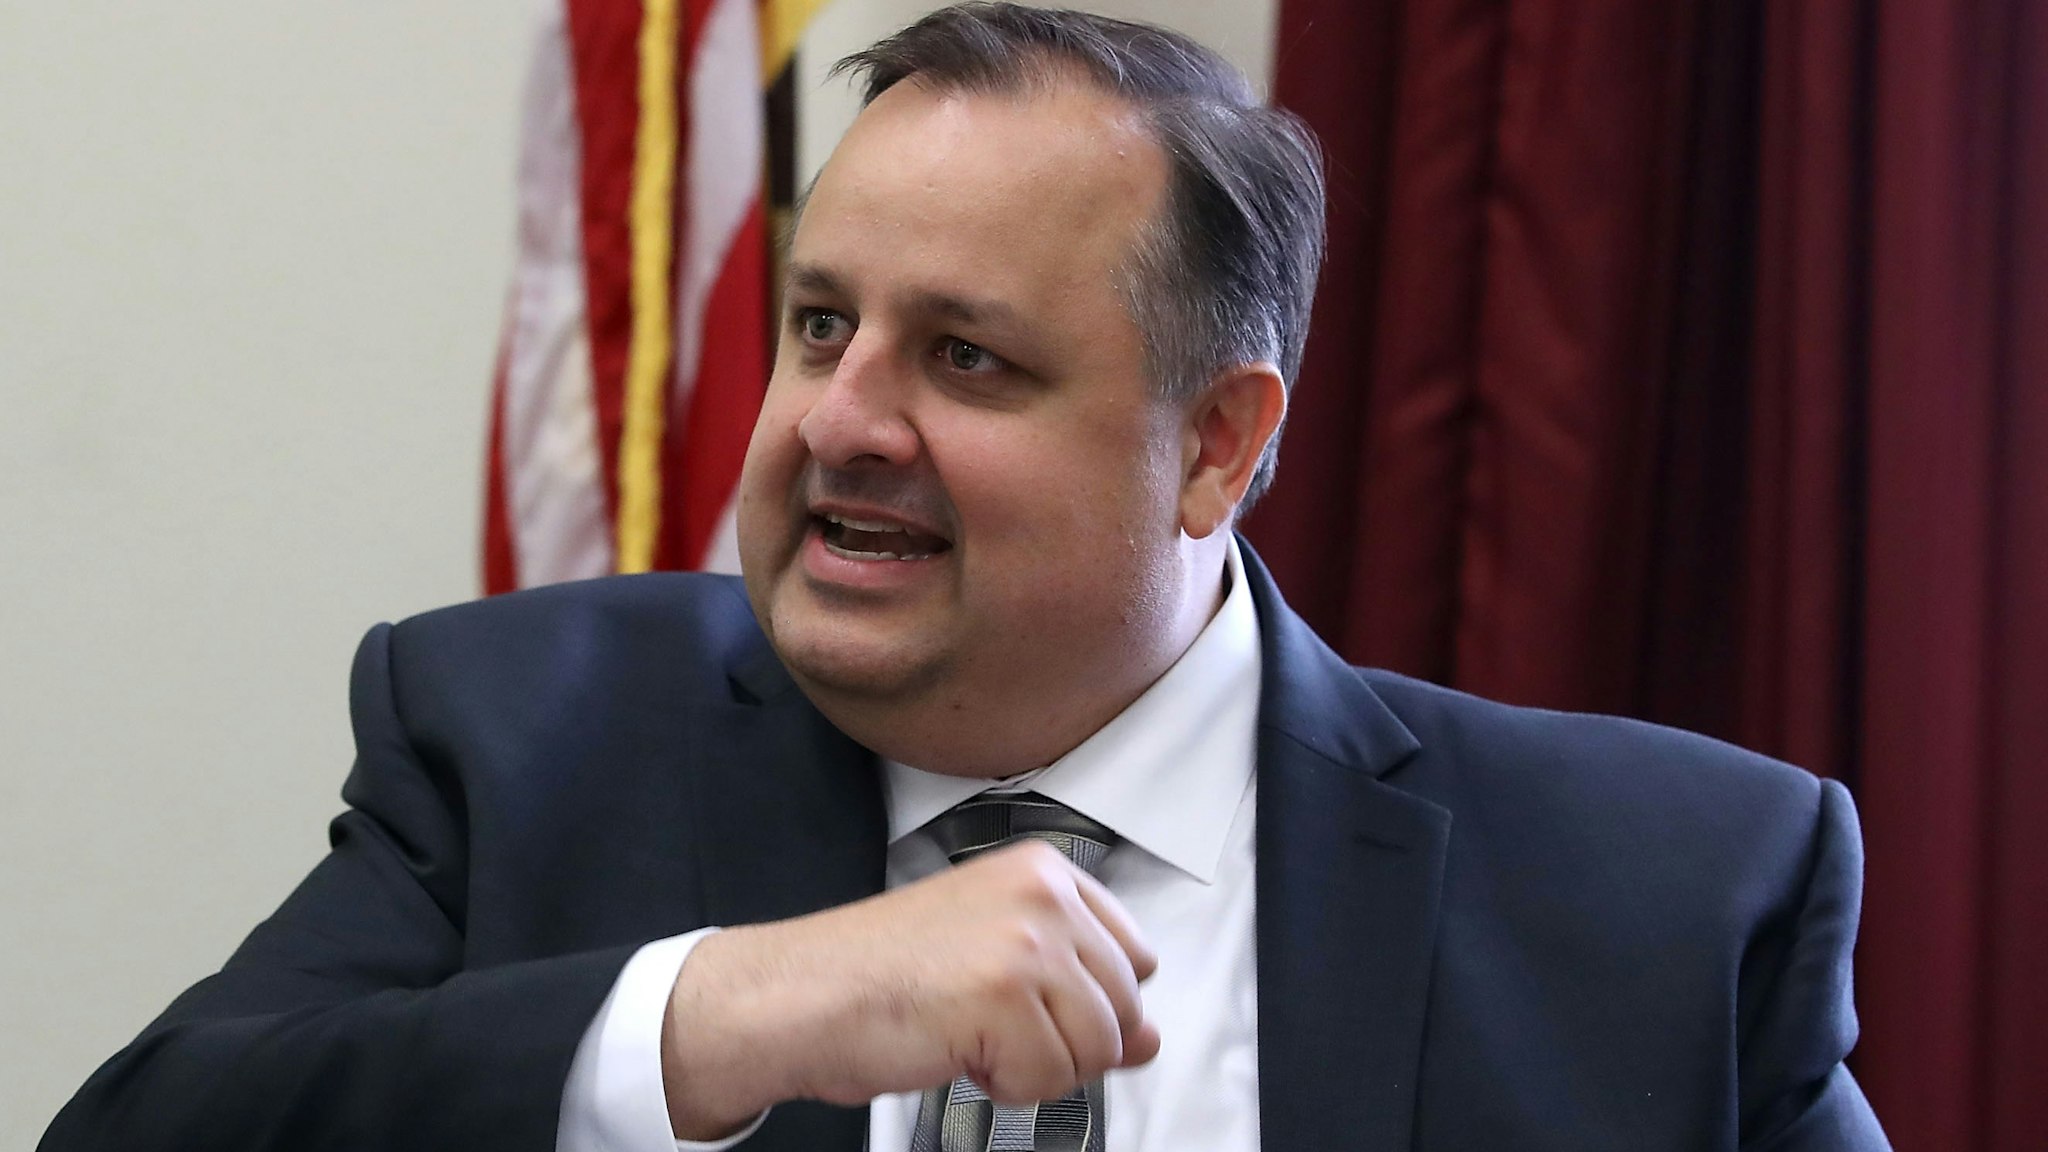 Walter Shaub, former director of the Office of Government Ethics, participates in a briefing on about President Trump's refusal to divest his businesses and the administration's delay in disclosing ethics waivers for appointees, on Capitol Hill November 1, 2017 in Washington, DC.